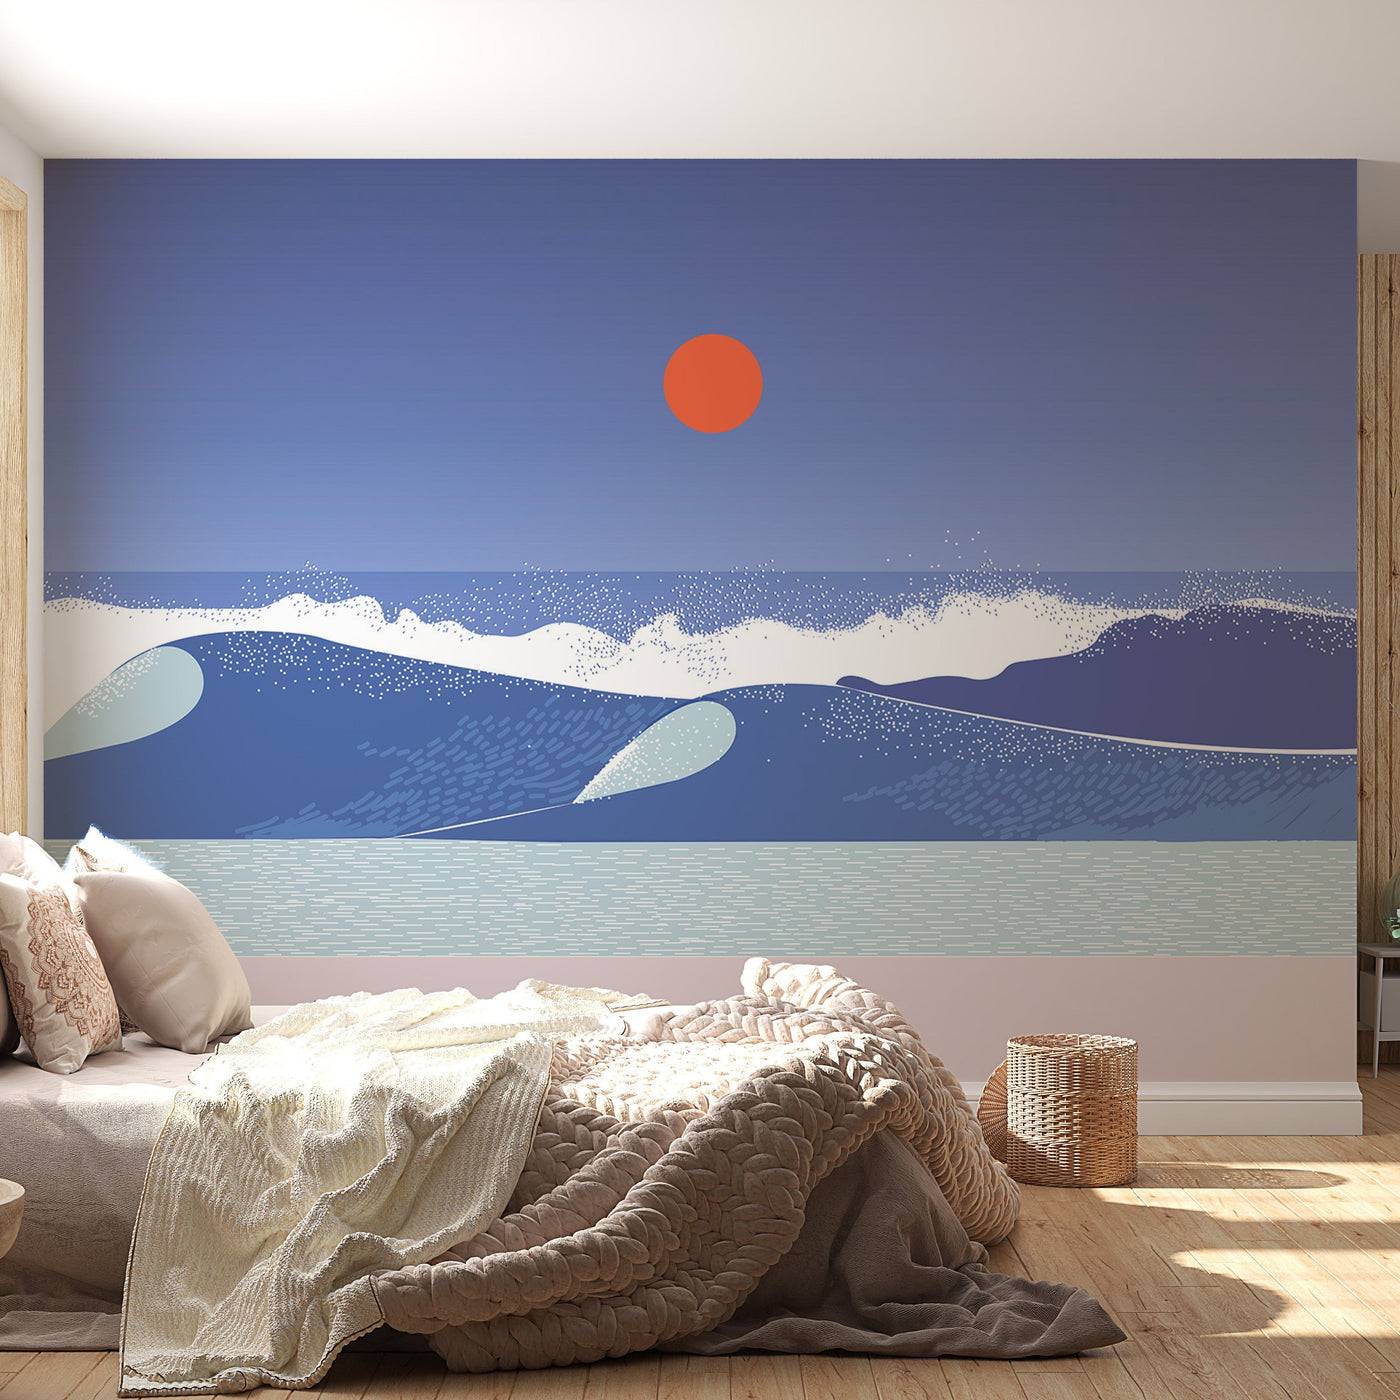 Peel & Stick Ocean Wall Mural - Sea Breeze - Removable Wall Decals-Tiptophomedecor